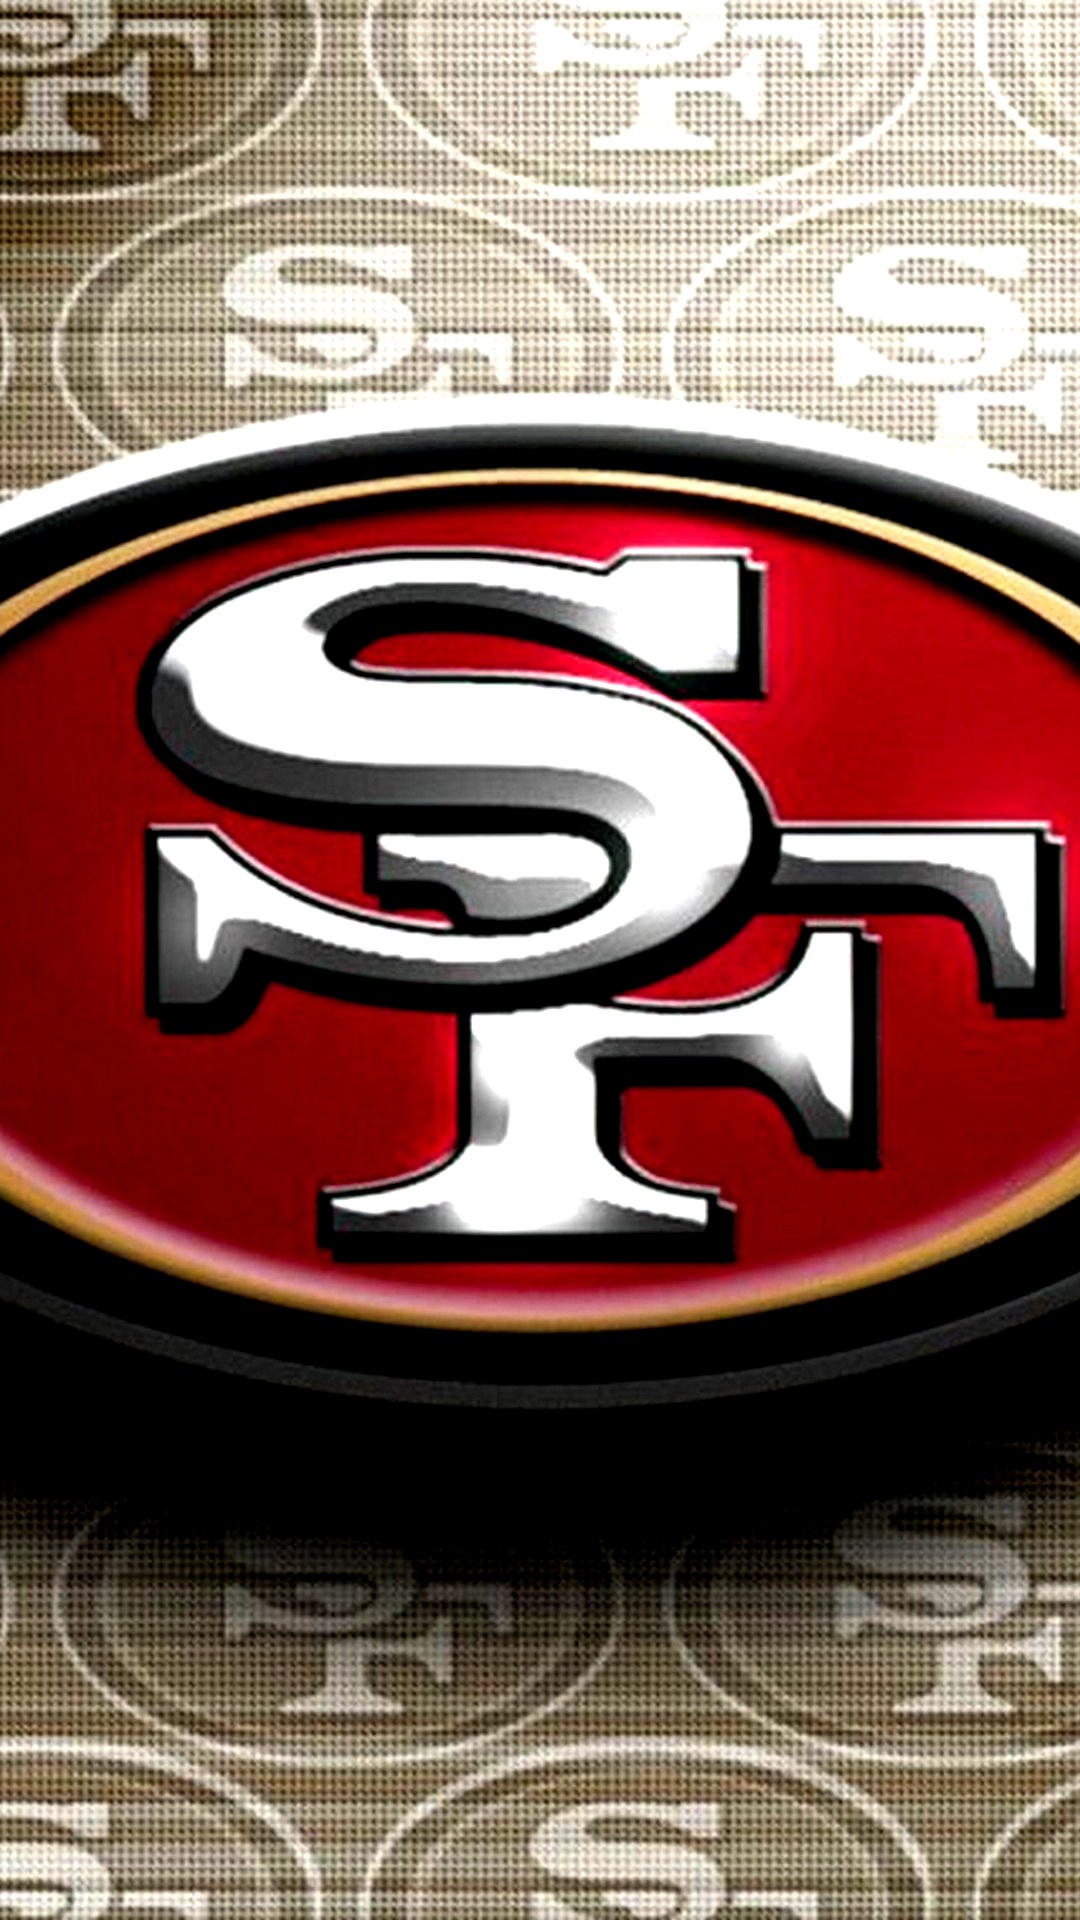 49ers iPhone Wallpaper High Quality With high-resolution 1080X1920 pixel. Donwload and set as wallpaper for your iPhone X, iPhone XS home screen backgrounds, XS Max, XR, iPhone8 lock screen wallpaper, iPhone 7, 6, SE, and other mobile devices